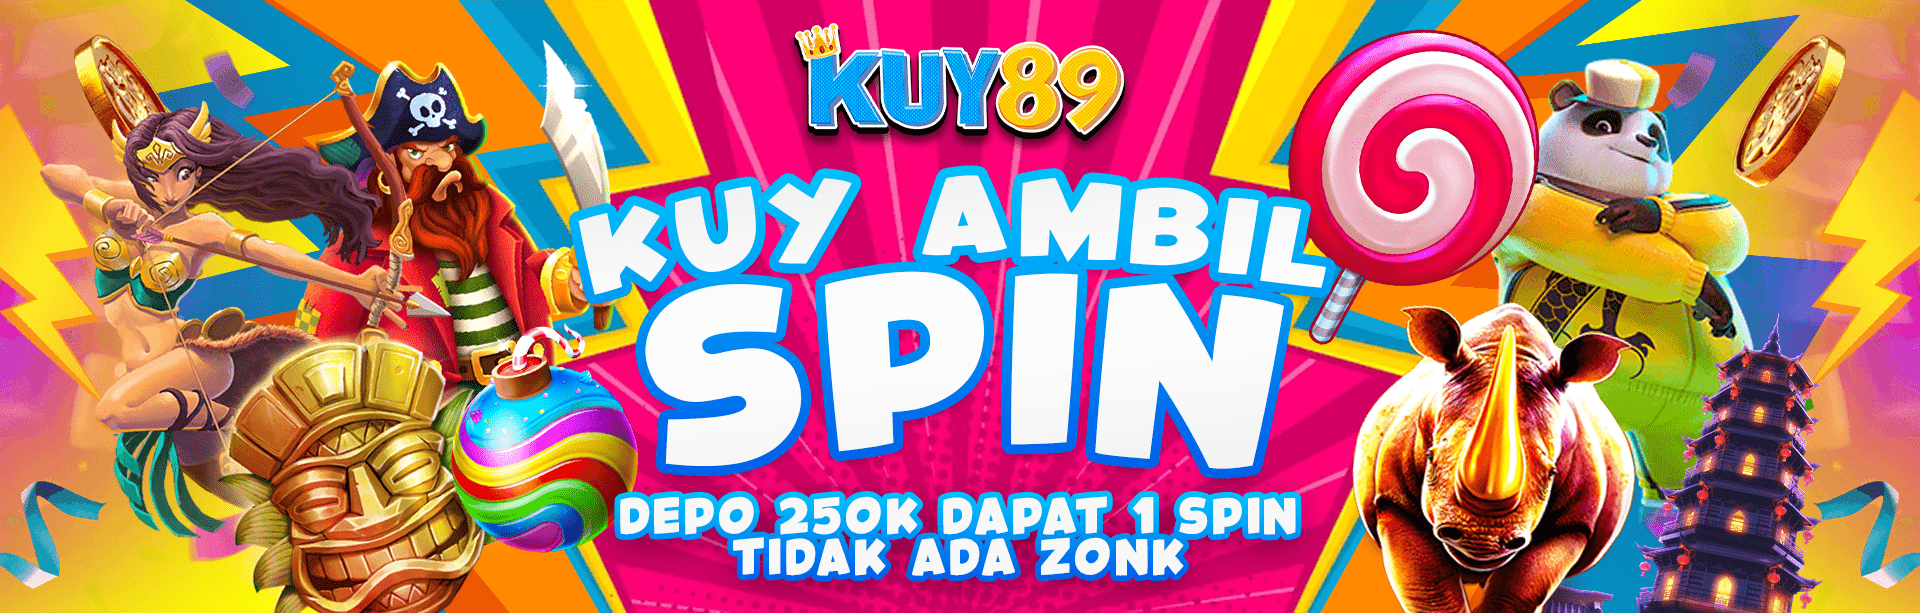 KUY AMBIL SPIN